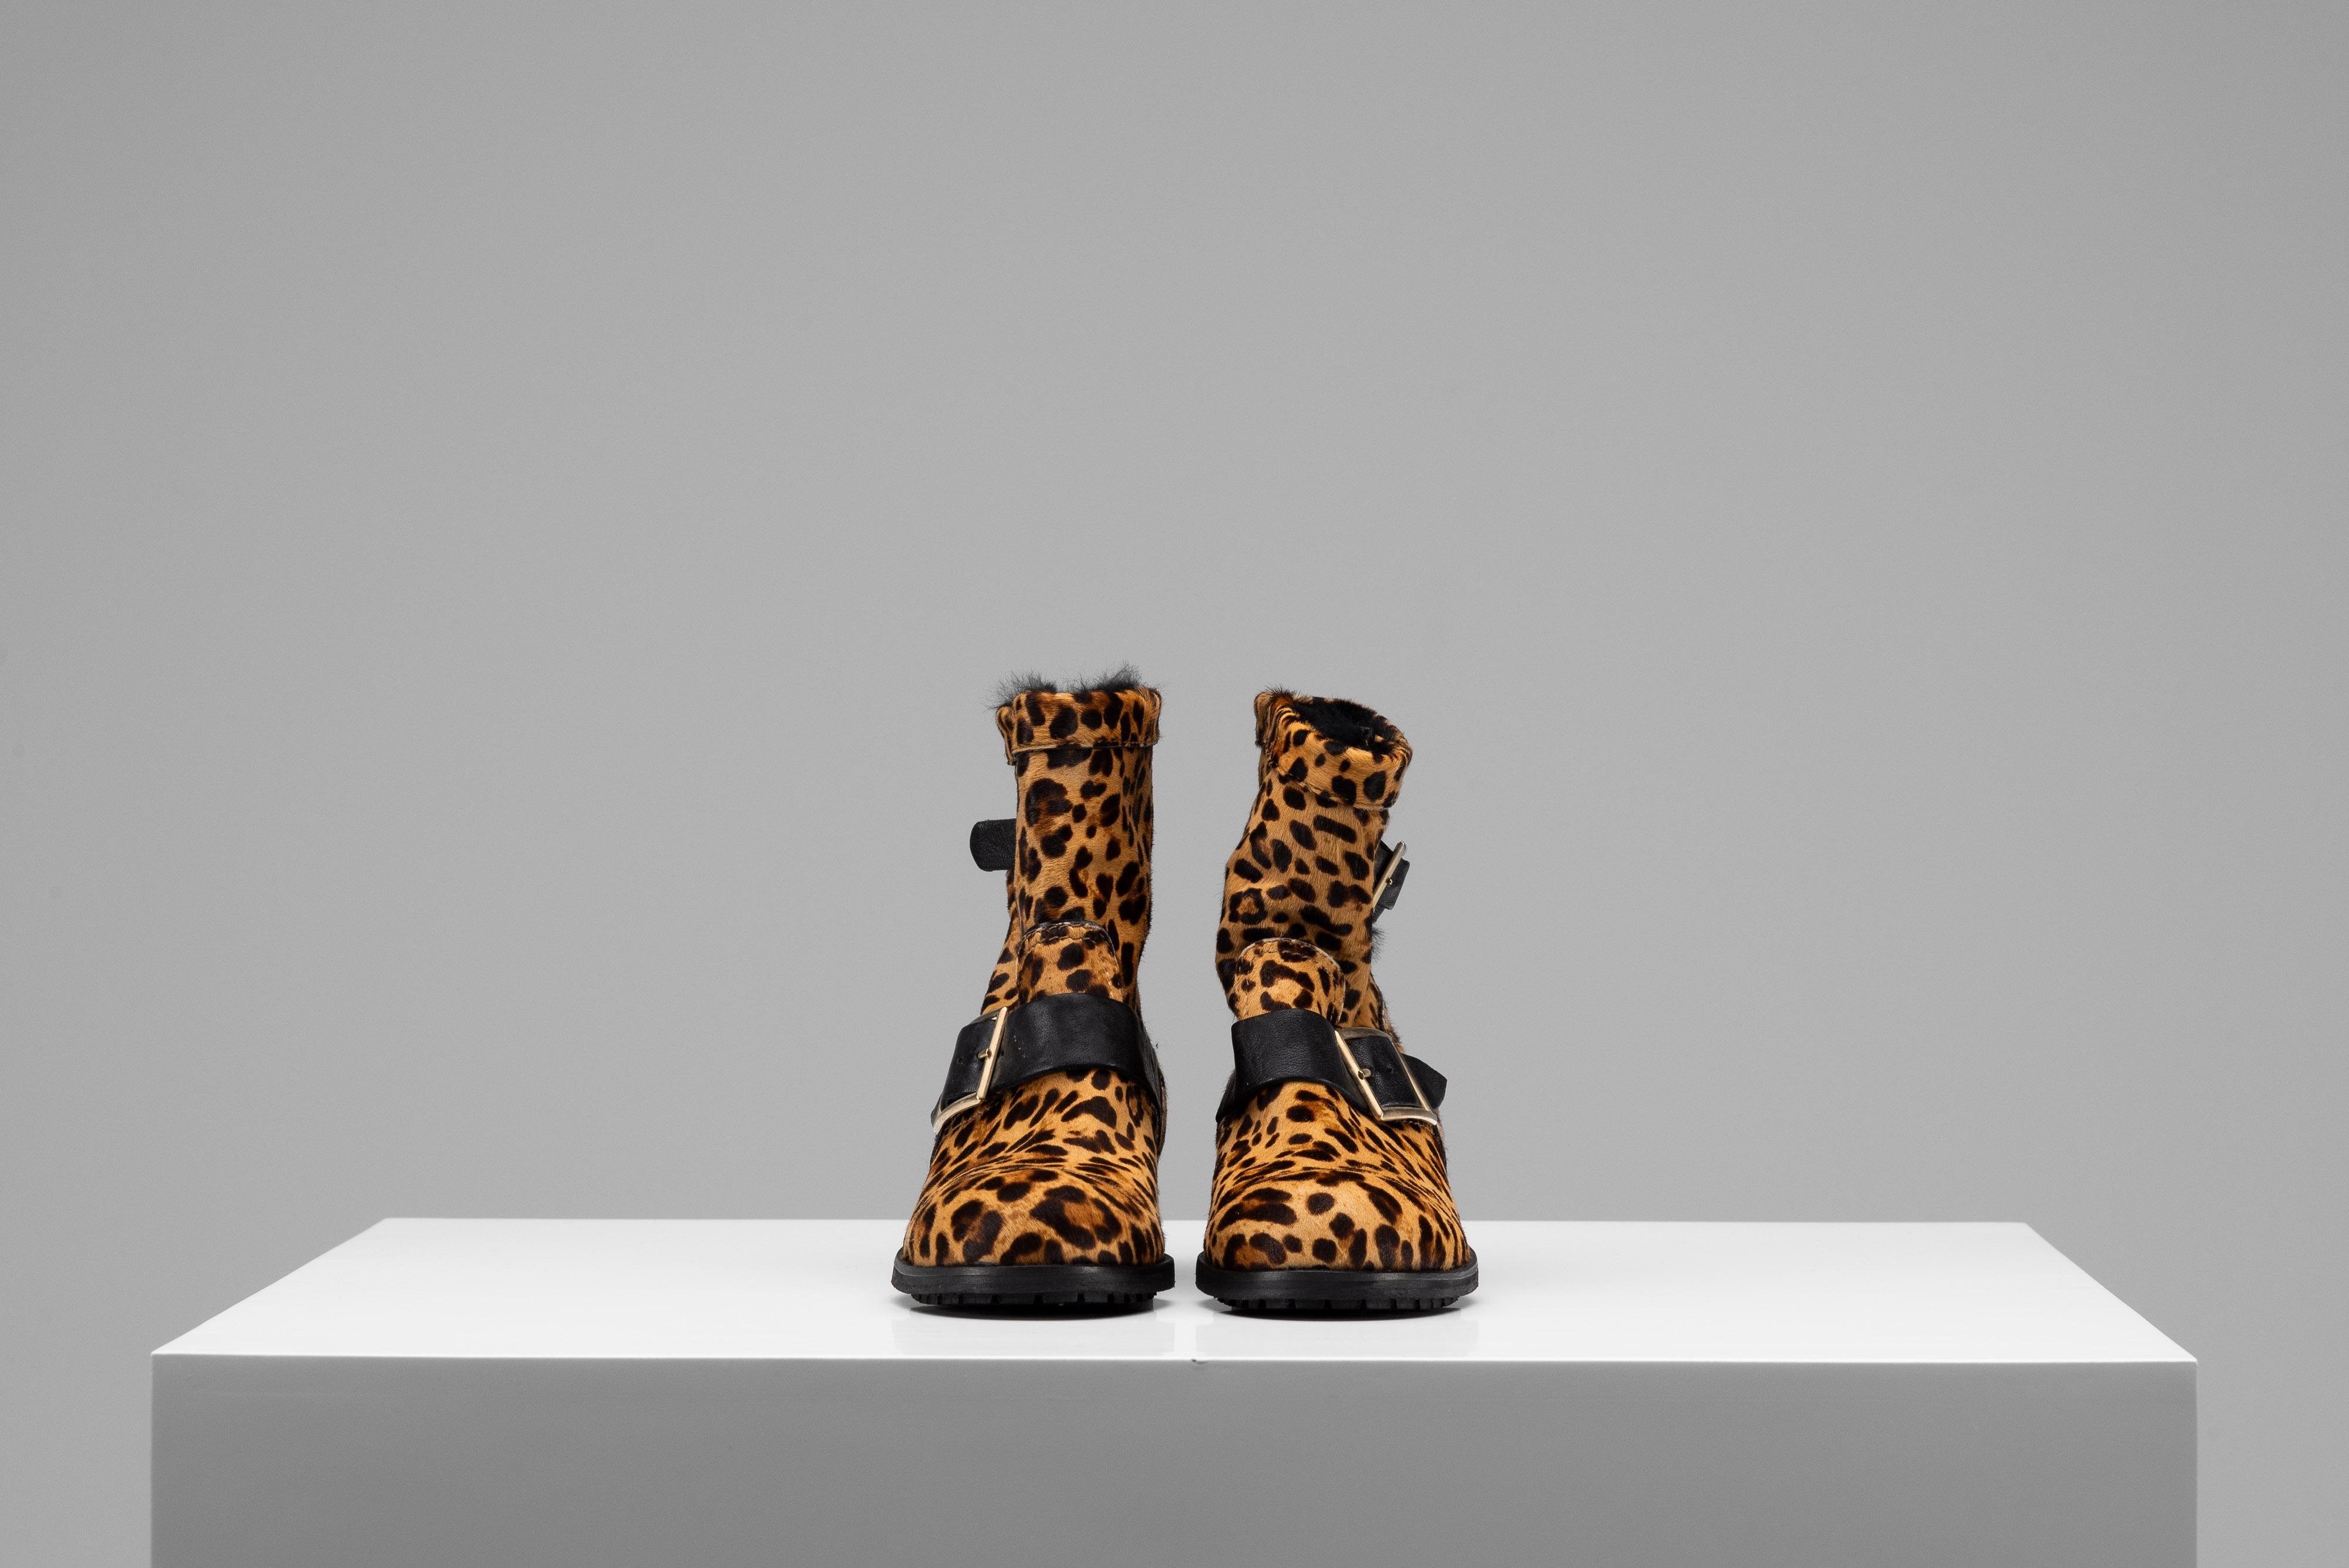 From the collection of SAVINETI we offer these pair of Jimmy Choo Leopard Boots:
- Brand: Jimmy Choo
- Model: Leopard Print Boots
- Size: 36
- Condition: as NEW (price tag still on) 

Authenticity is our core value at SAVINETI and this process meets